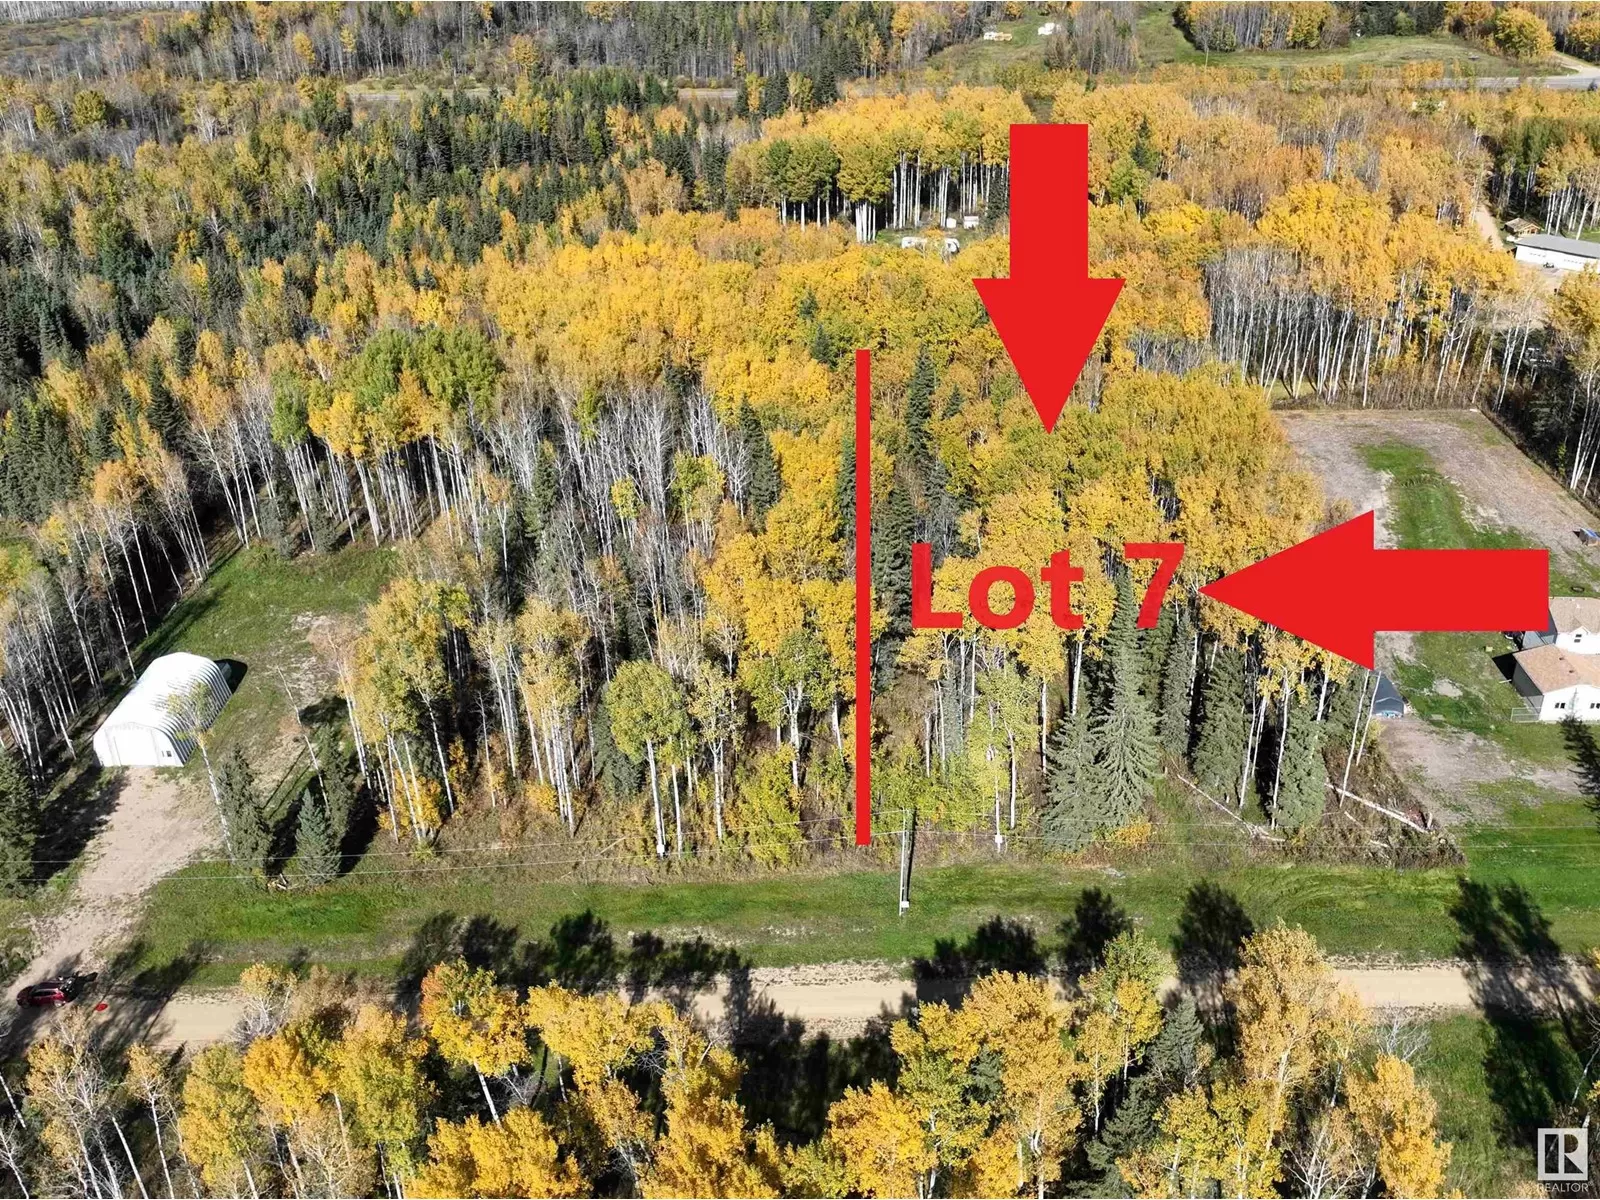 No Building for rent: Lot 7 Forest Road (rr 214), Rural Athabasca County, Alberta T9S 1C4